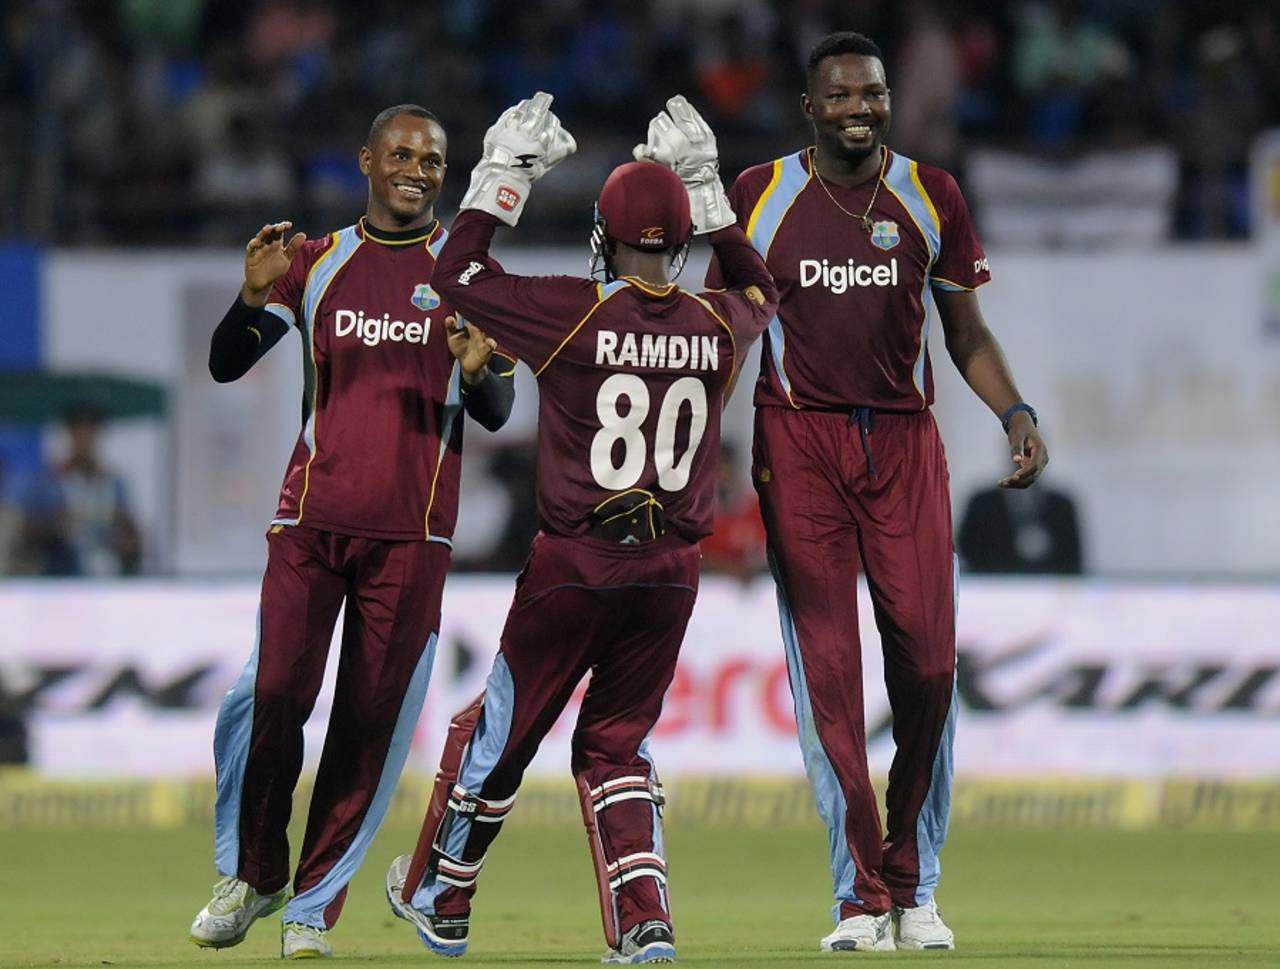 West Indies players did well to beat India comprehensively in the first ODI, but that doesn't mean morale is high&nbsp;&nbsp;&bull;&nbsp;&nbsp;BCCI